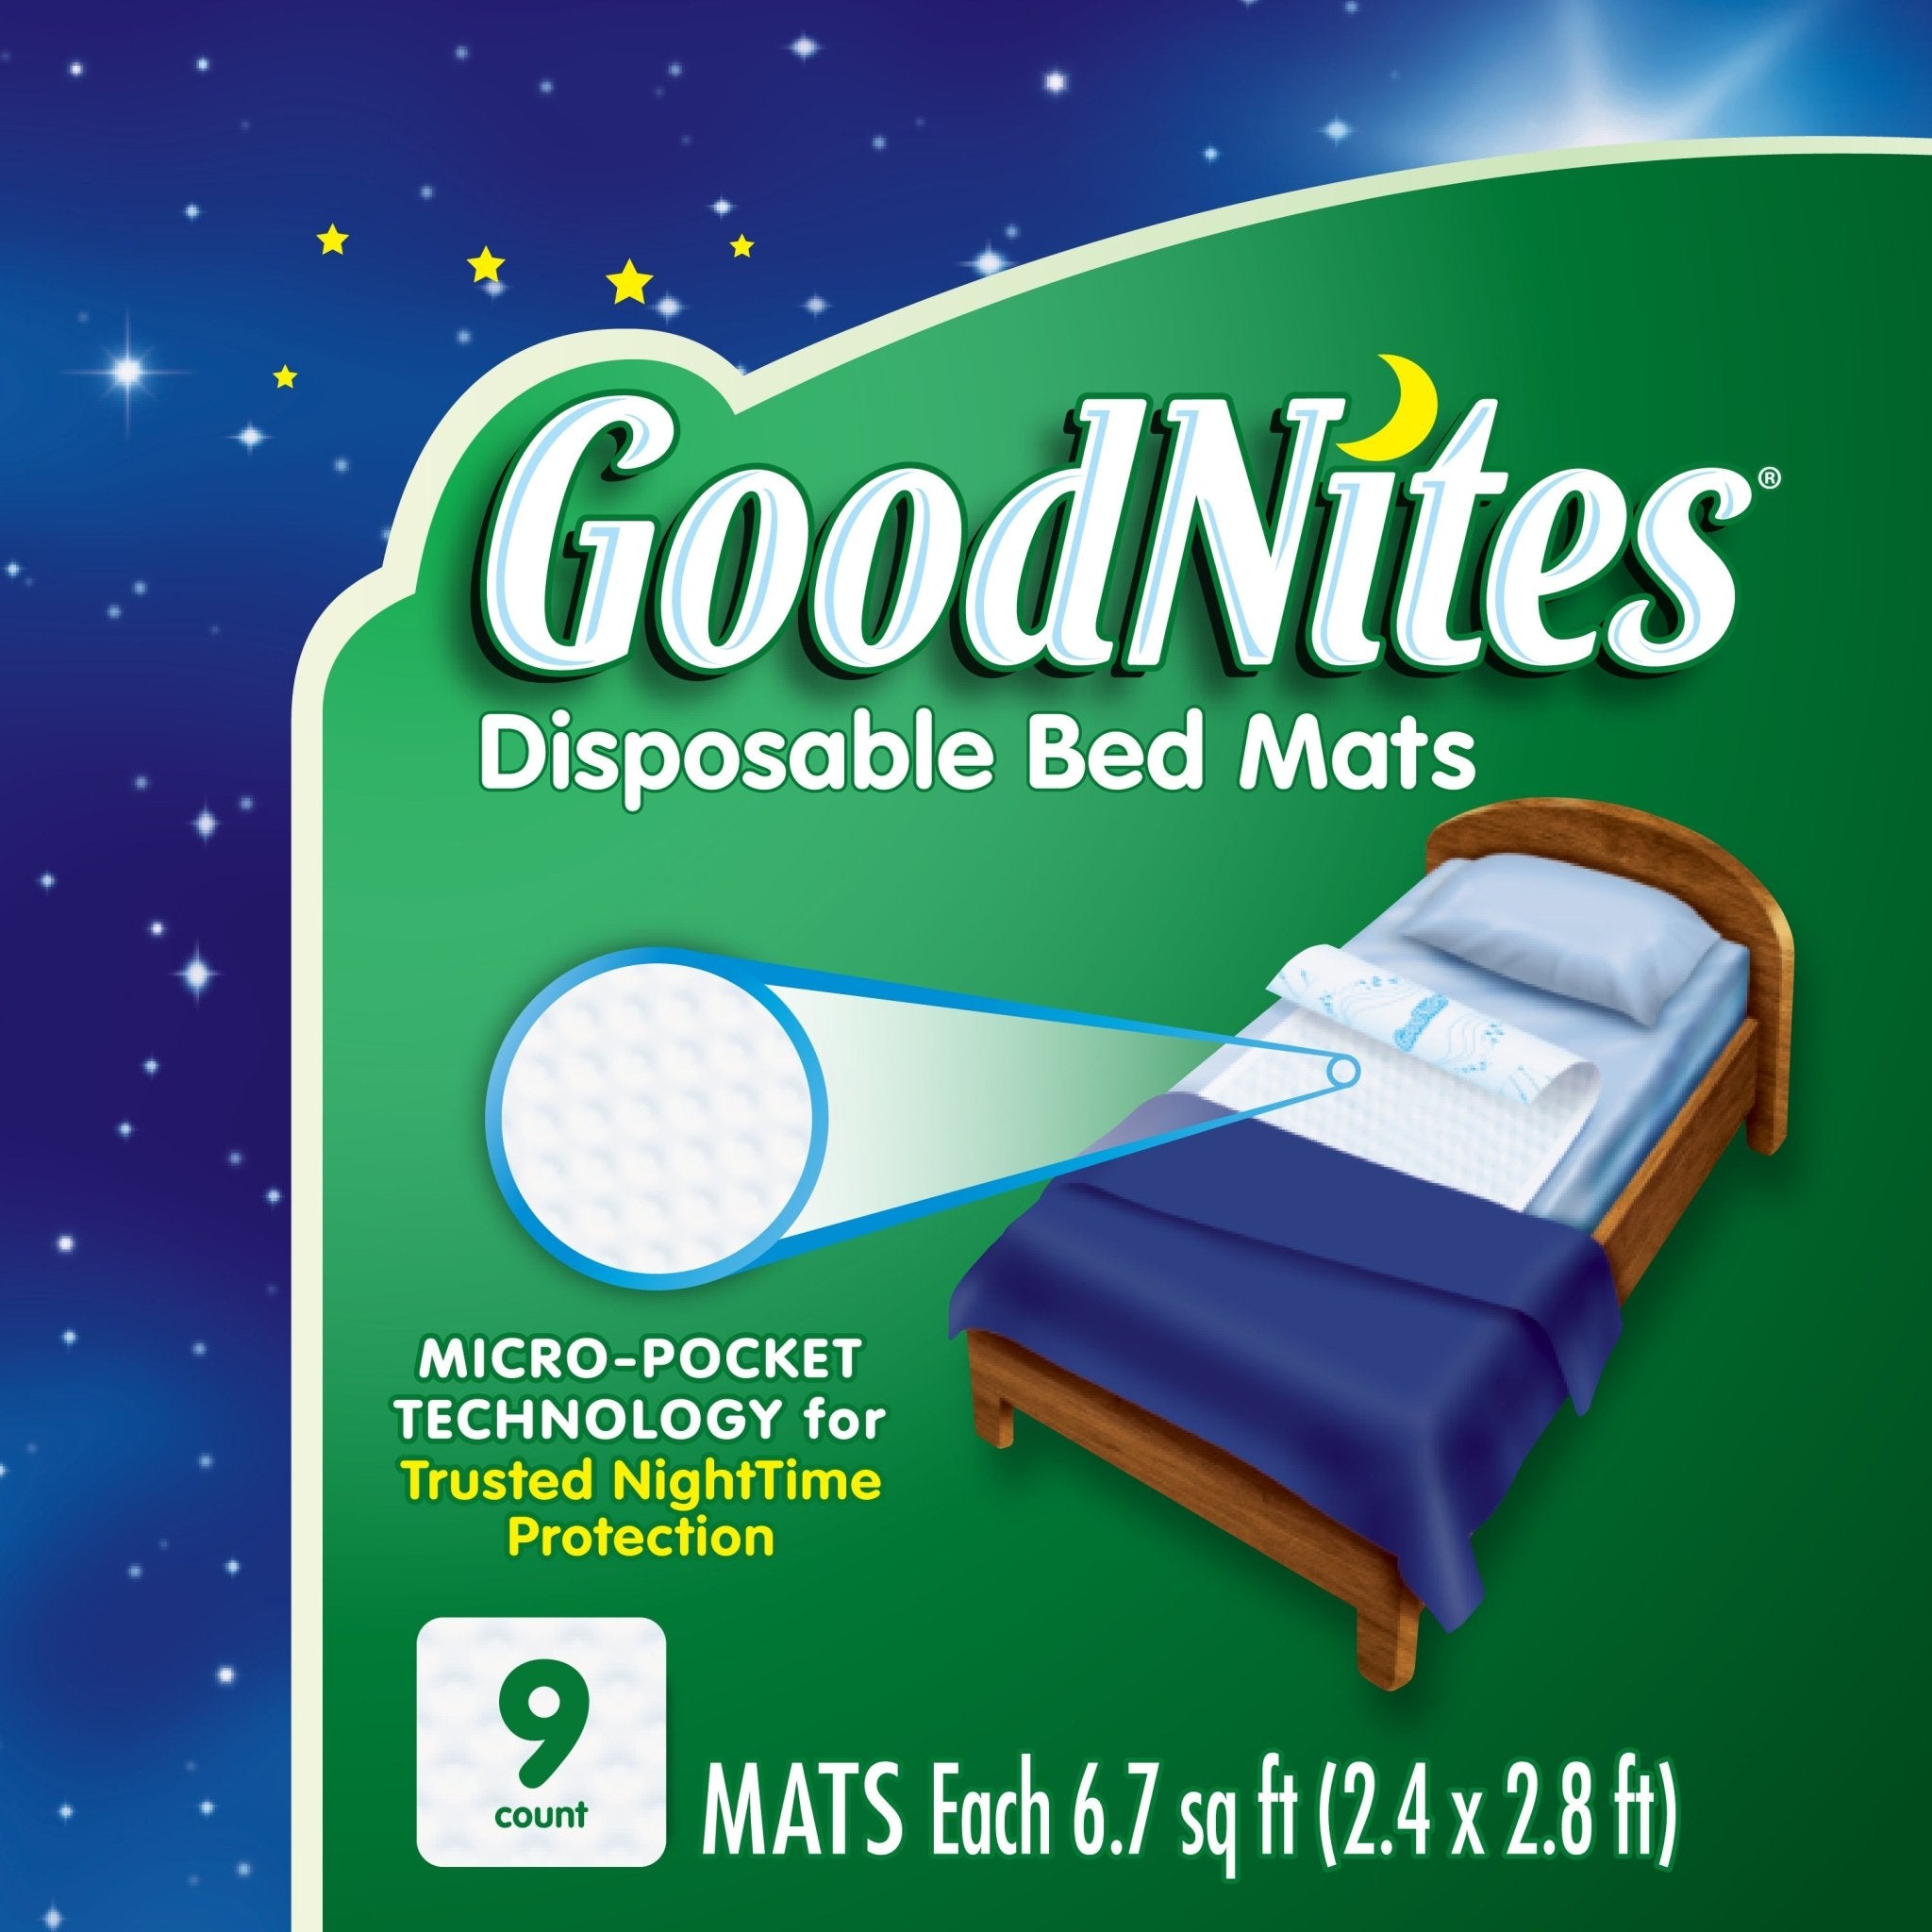 CA/36 - GoodNites Disposable Bed Pads for Nighttime Bedwetting, Non-Slip Waterproof Mattress Pad, 30" x 36", 9 Count - Best Buy Medical Supplies